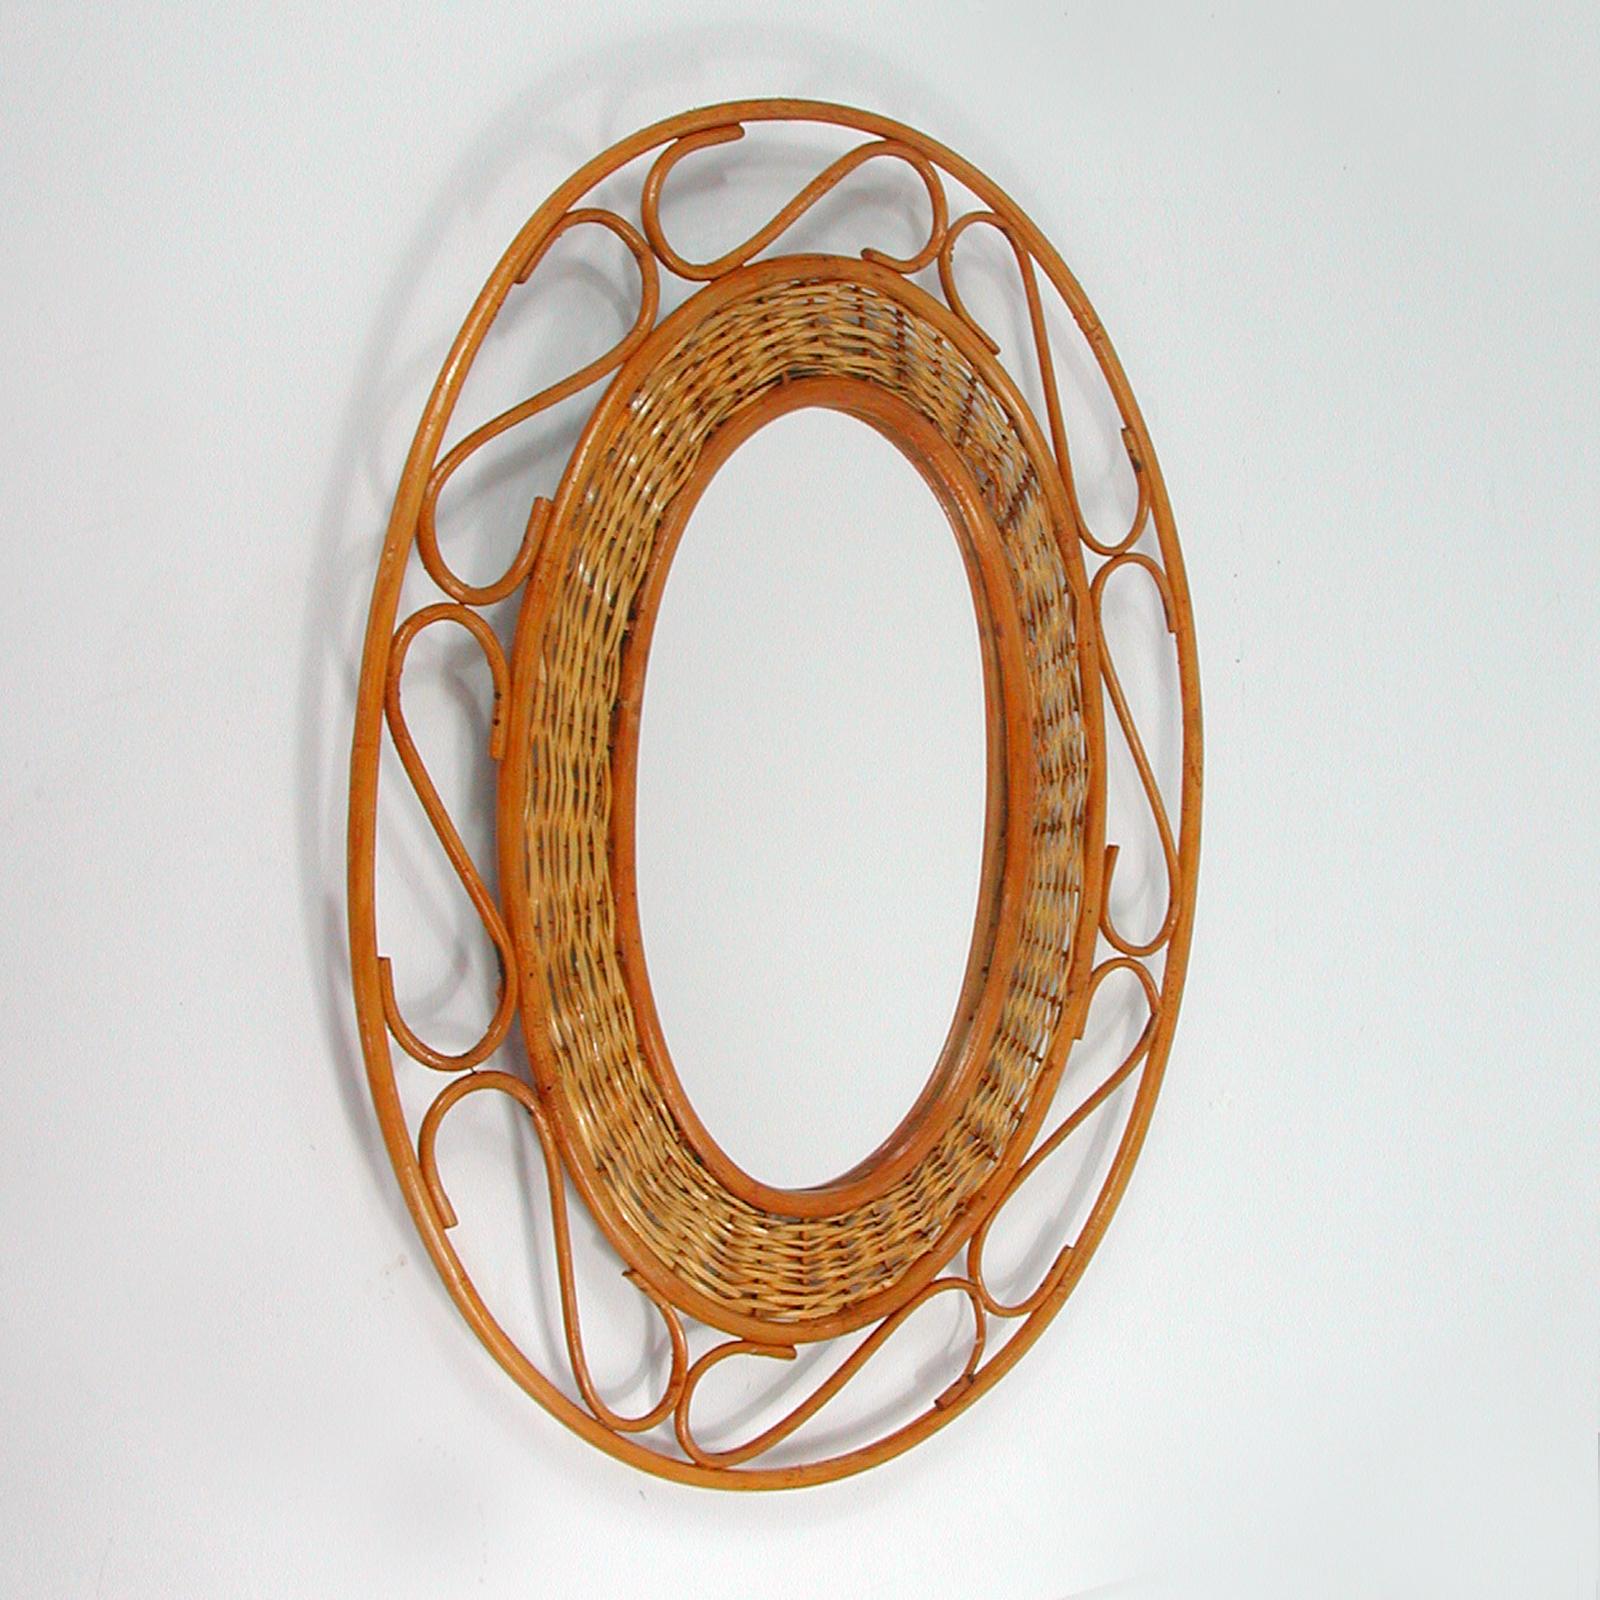 This vintage Franco Albini style wall mirror was made in France in the 1950s. It features an undulated rattan and wicker oval frame.

Condition is good with signs of age. Rattan with some wear. The mirror glass has been replaced and is new.